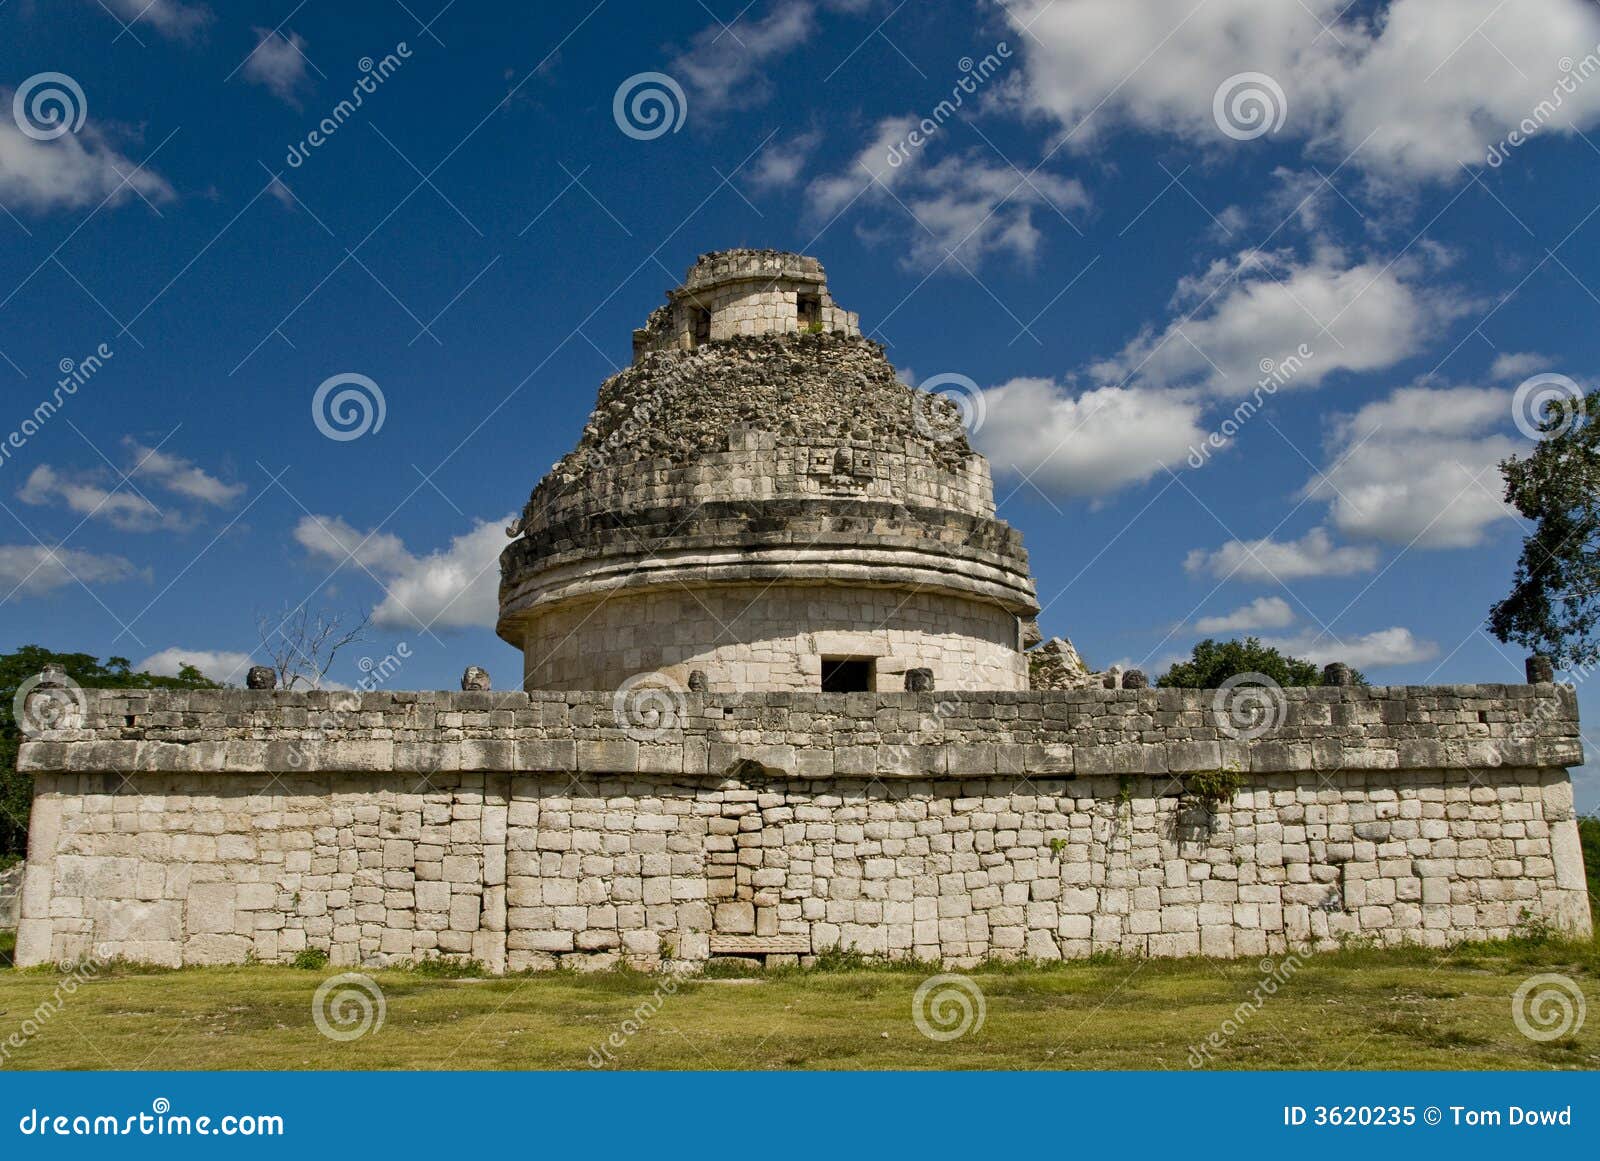 observatory ruins at chichen itza mexico